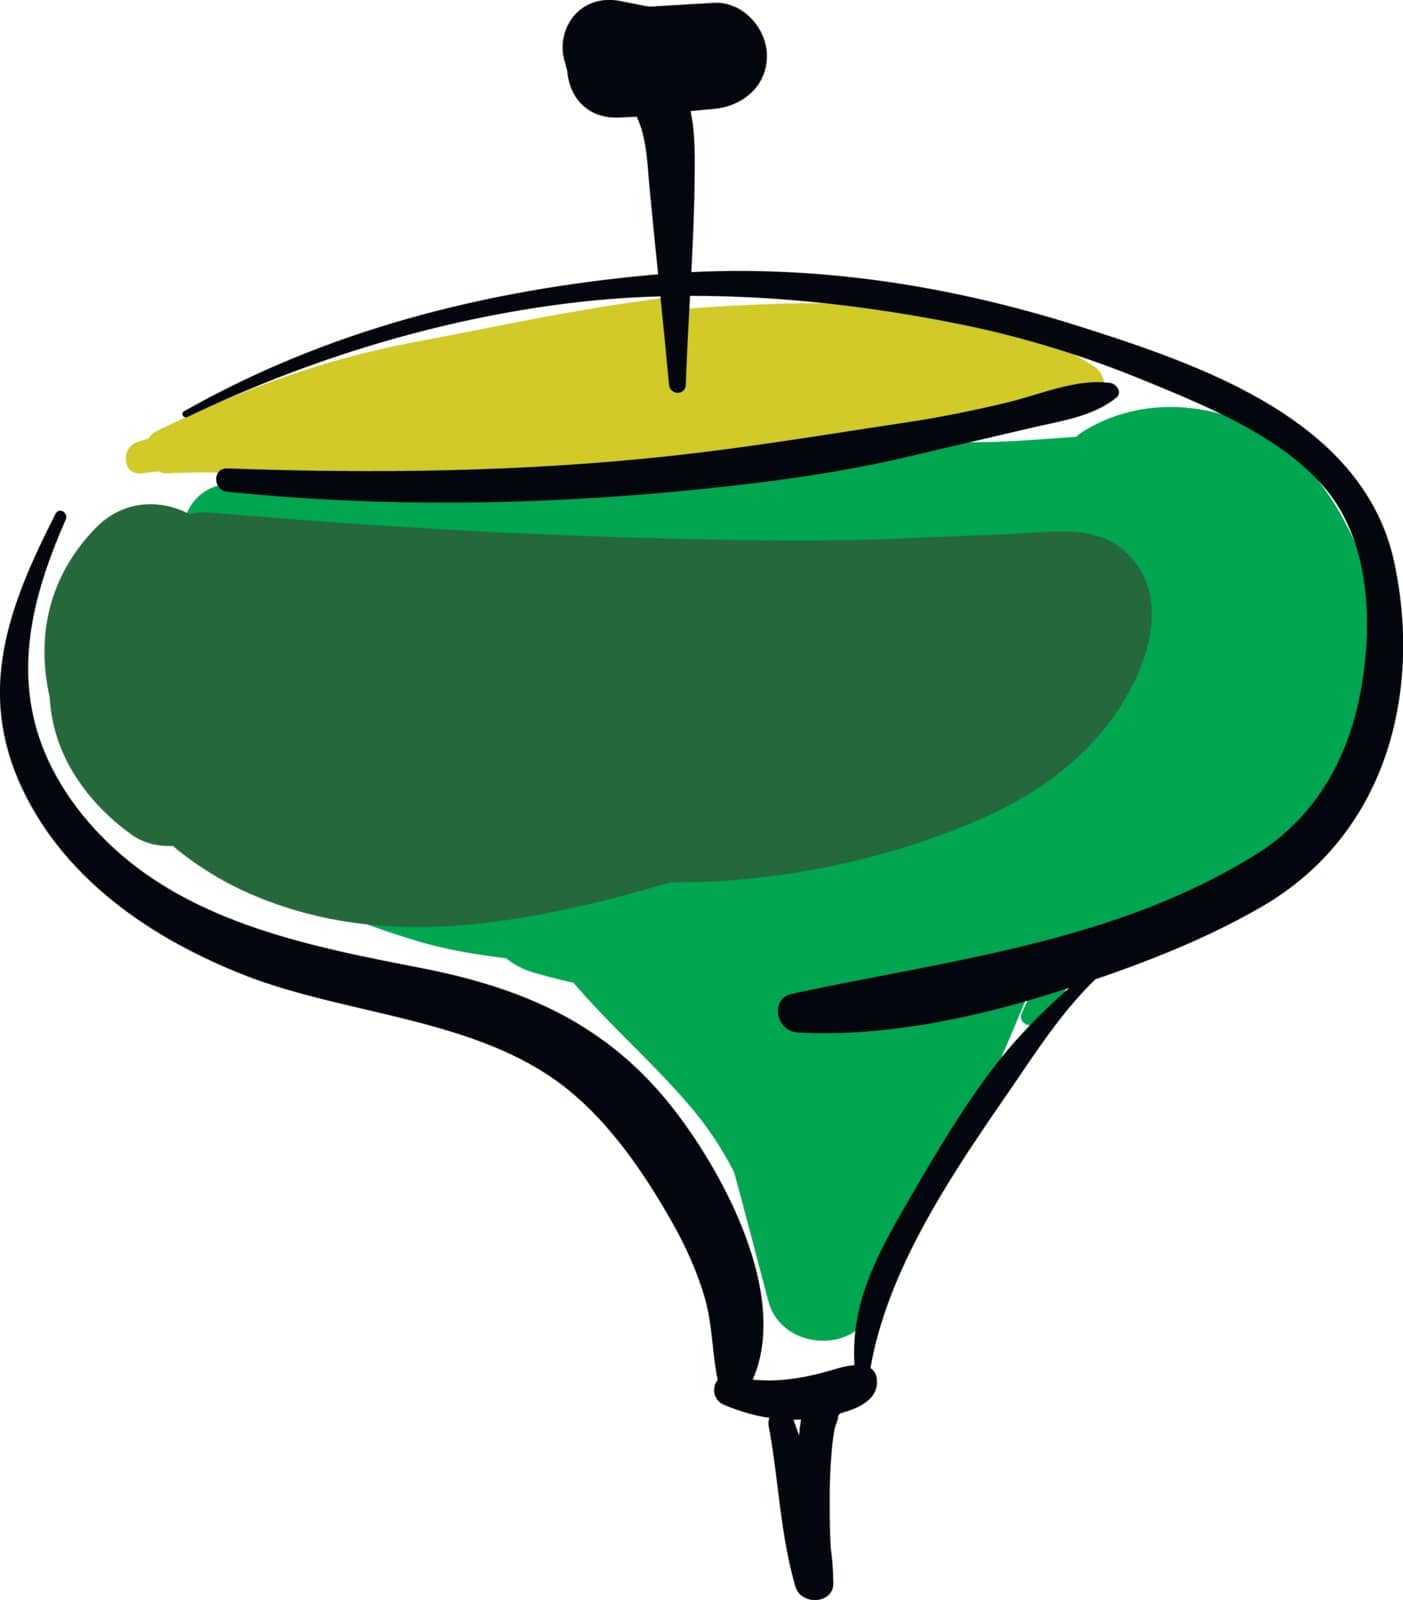 A green spinning top with its nail project up on the top vector color drawing or illustration